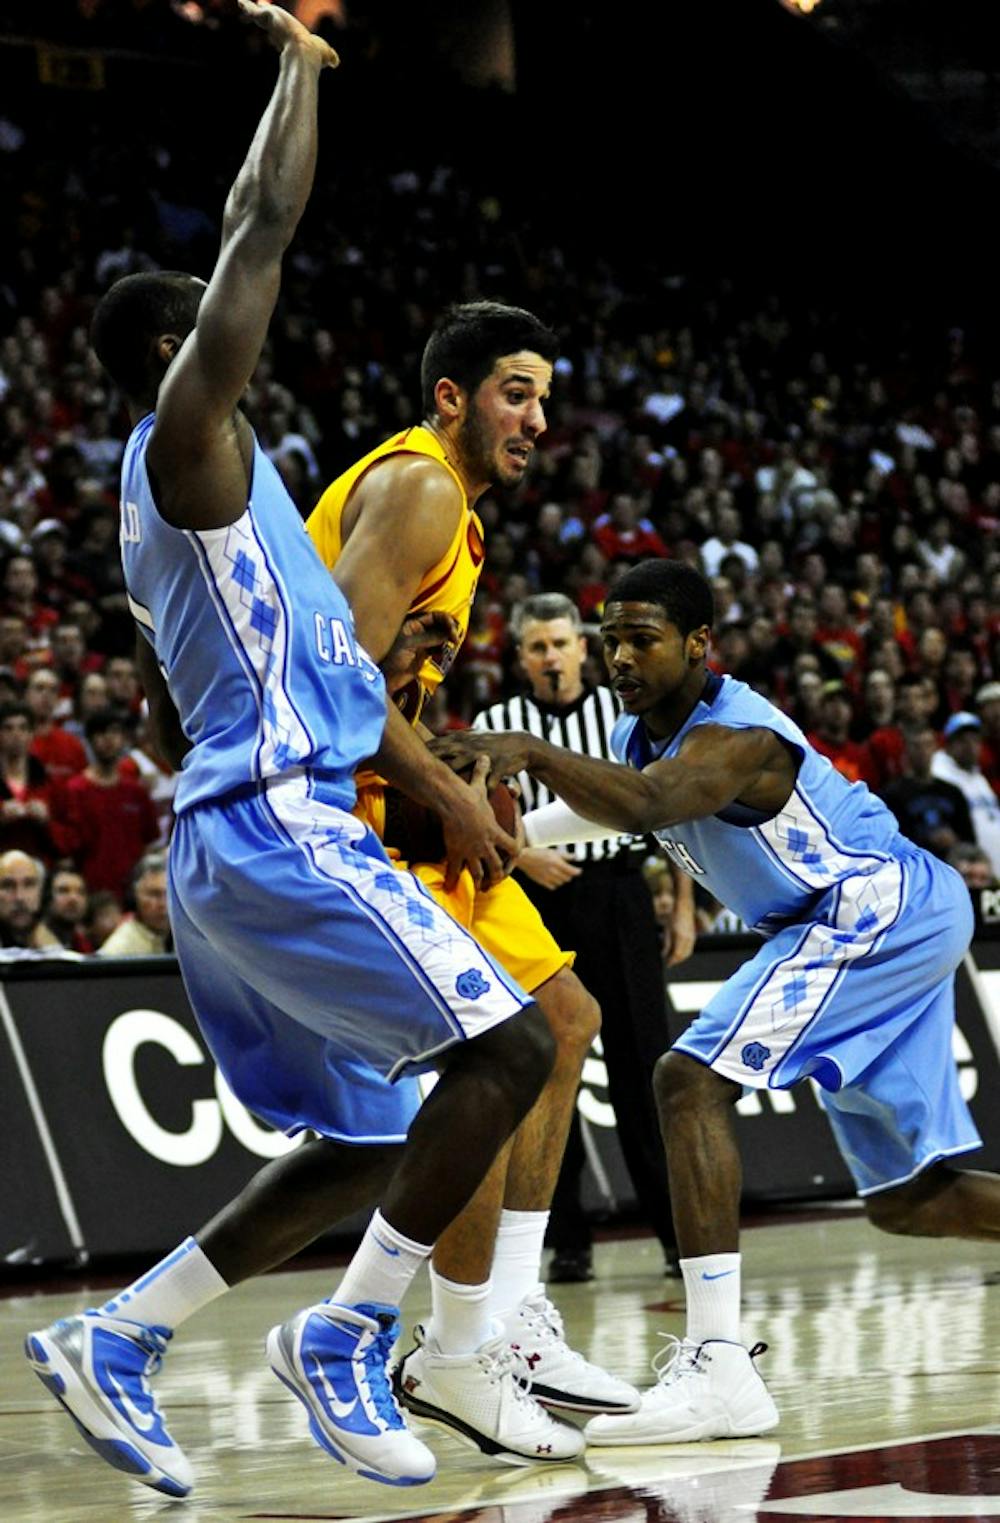 Dexter Strickland attempts to strip the ball from Maryland's Greivis Vasquez. Courtesy of Jaclyn Borowski/The Diamondback